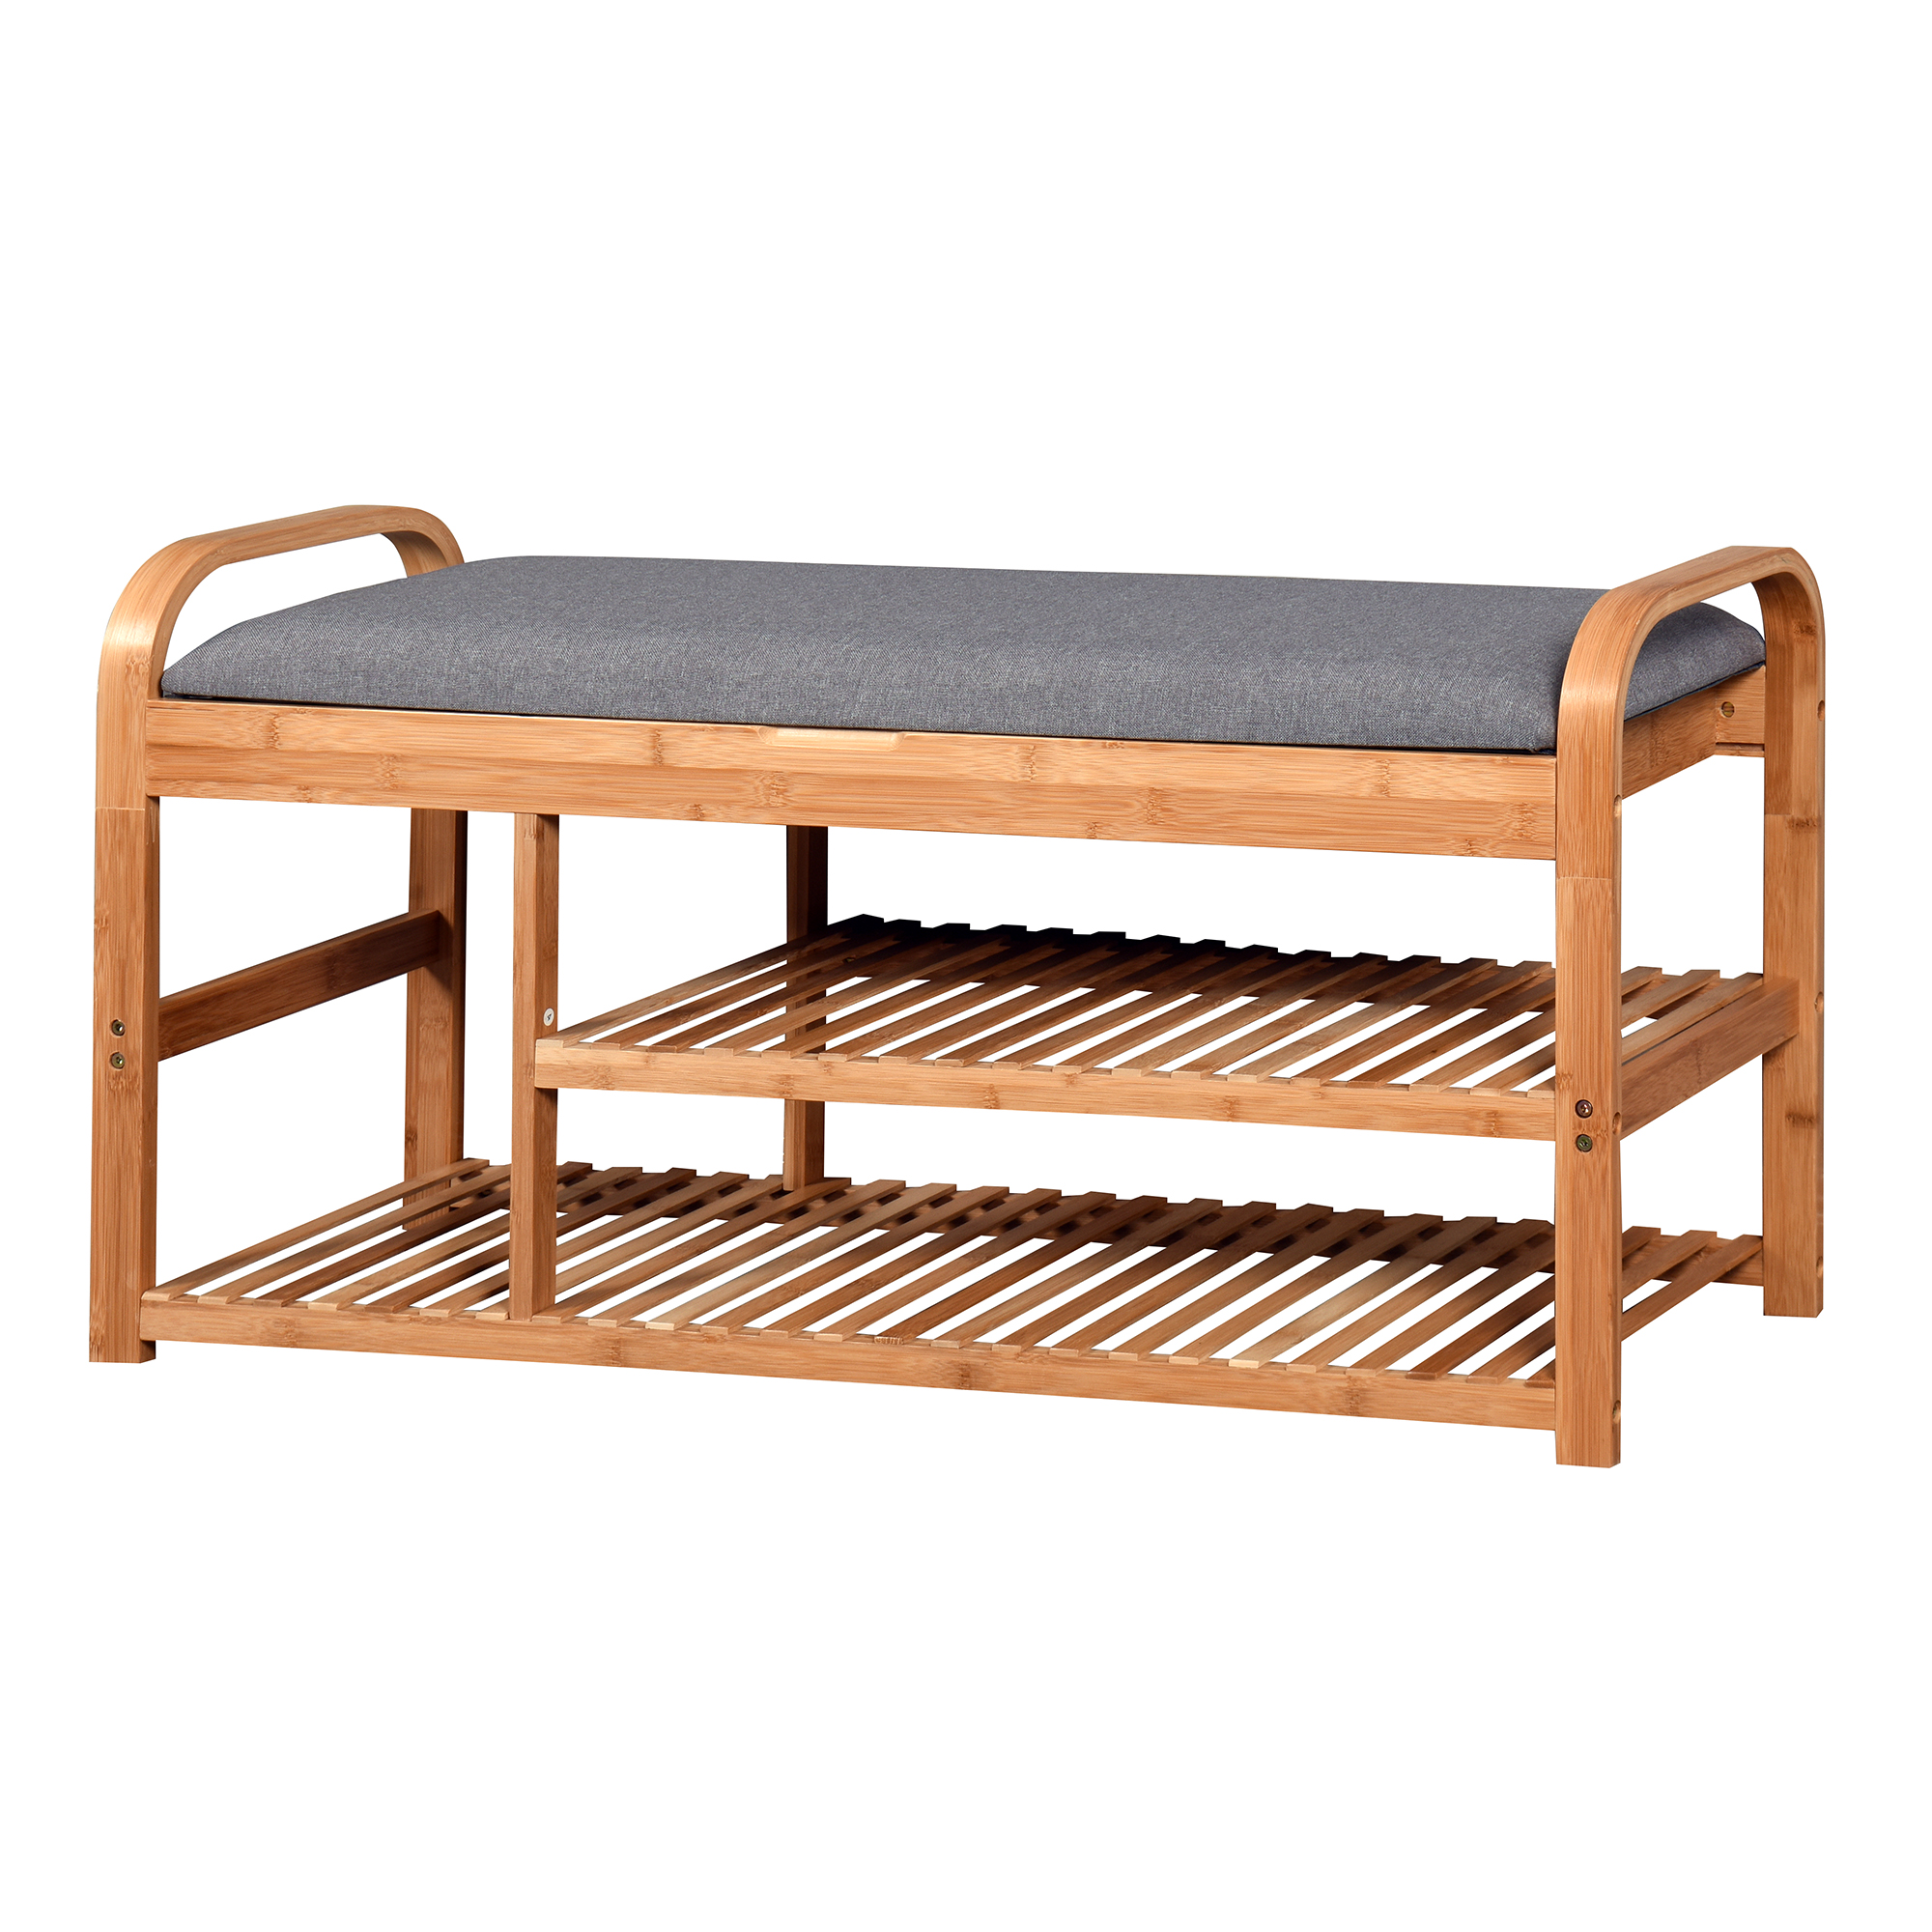 Living Room Bamboo Storage Bench， Entryway 3 Shelves Bench with flip storage compartment 39.37 x 13 x 19.88 inch-Boyel Living